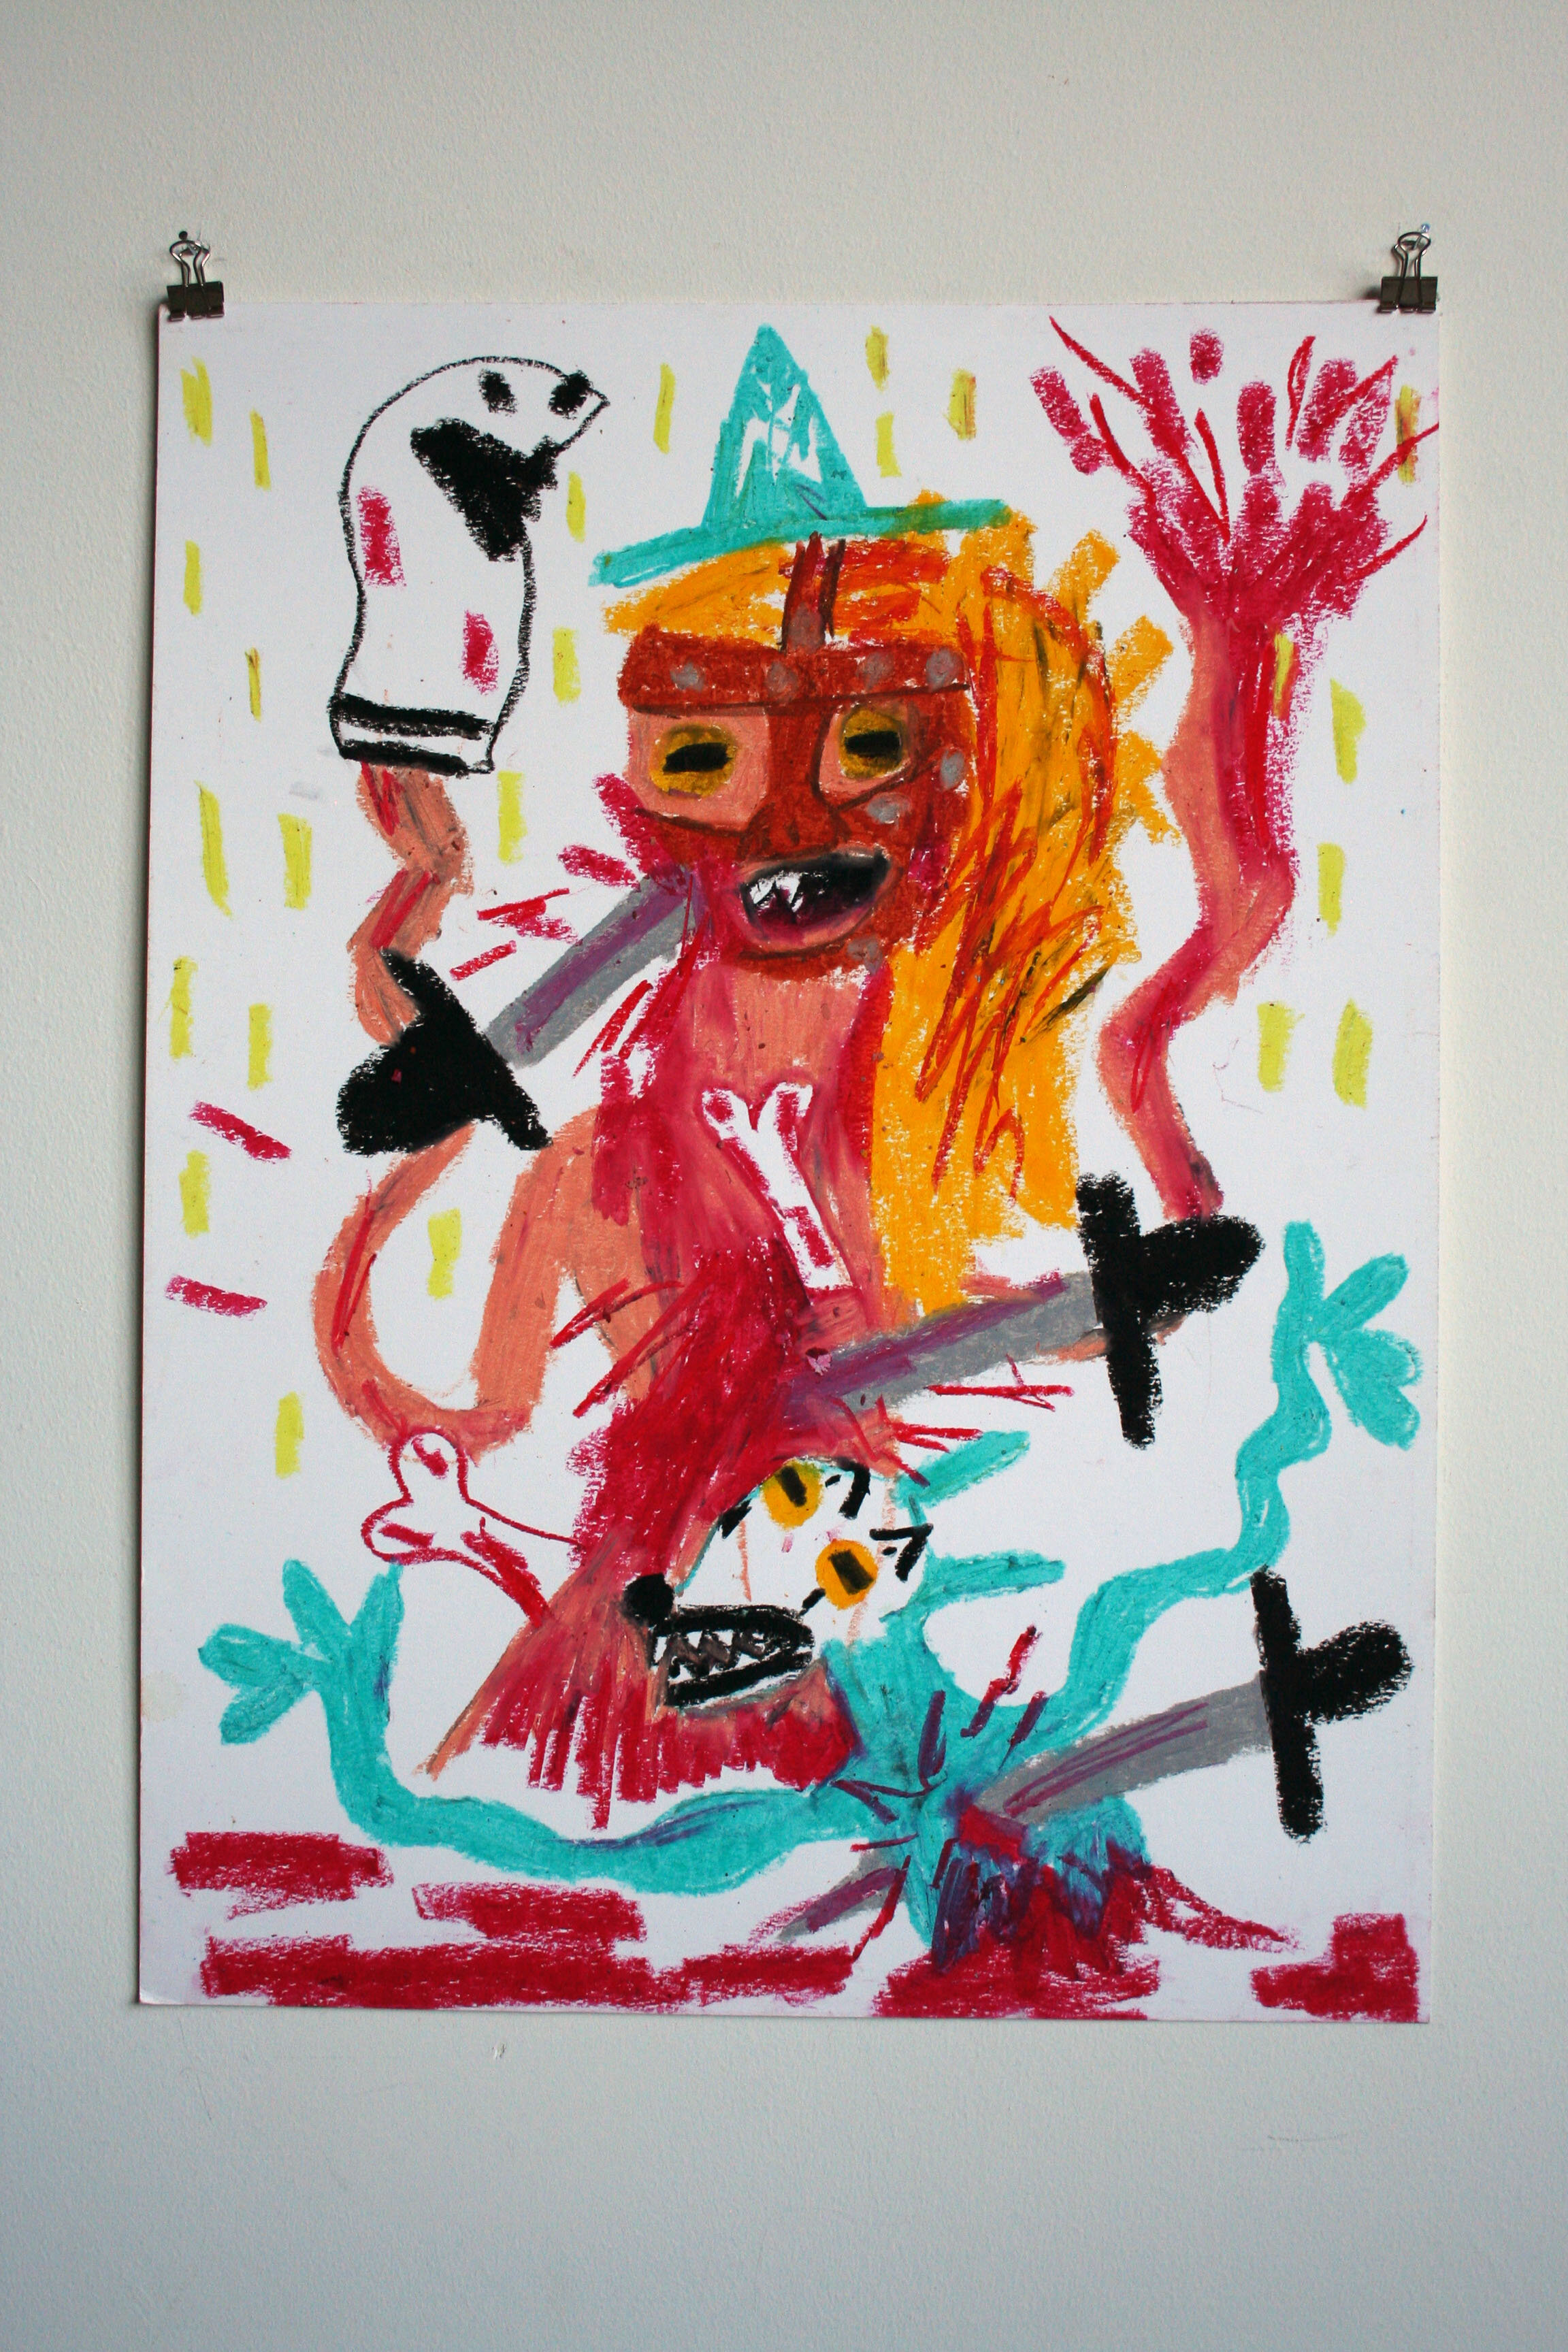   The Blonde Mankind and Mr. Socko,  2015  24 x 18 inches (60.96 x 45.72 cm.)  Oil pastel on paper 